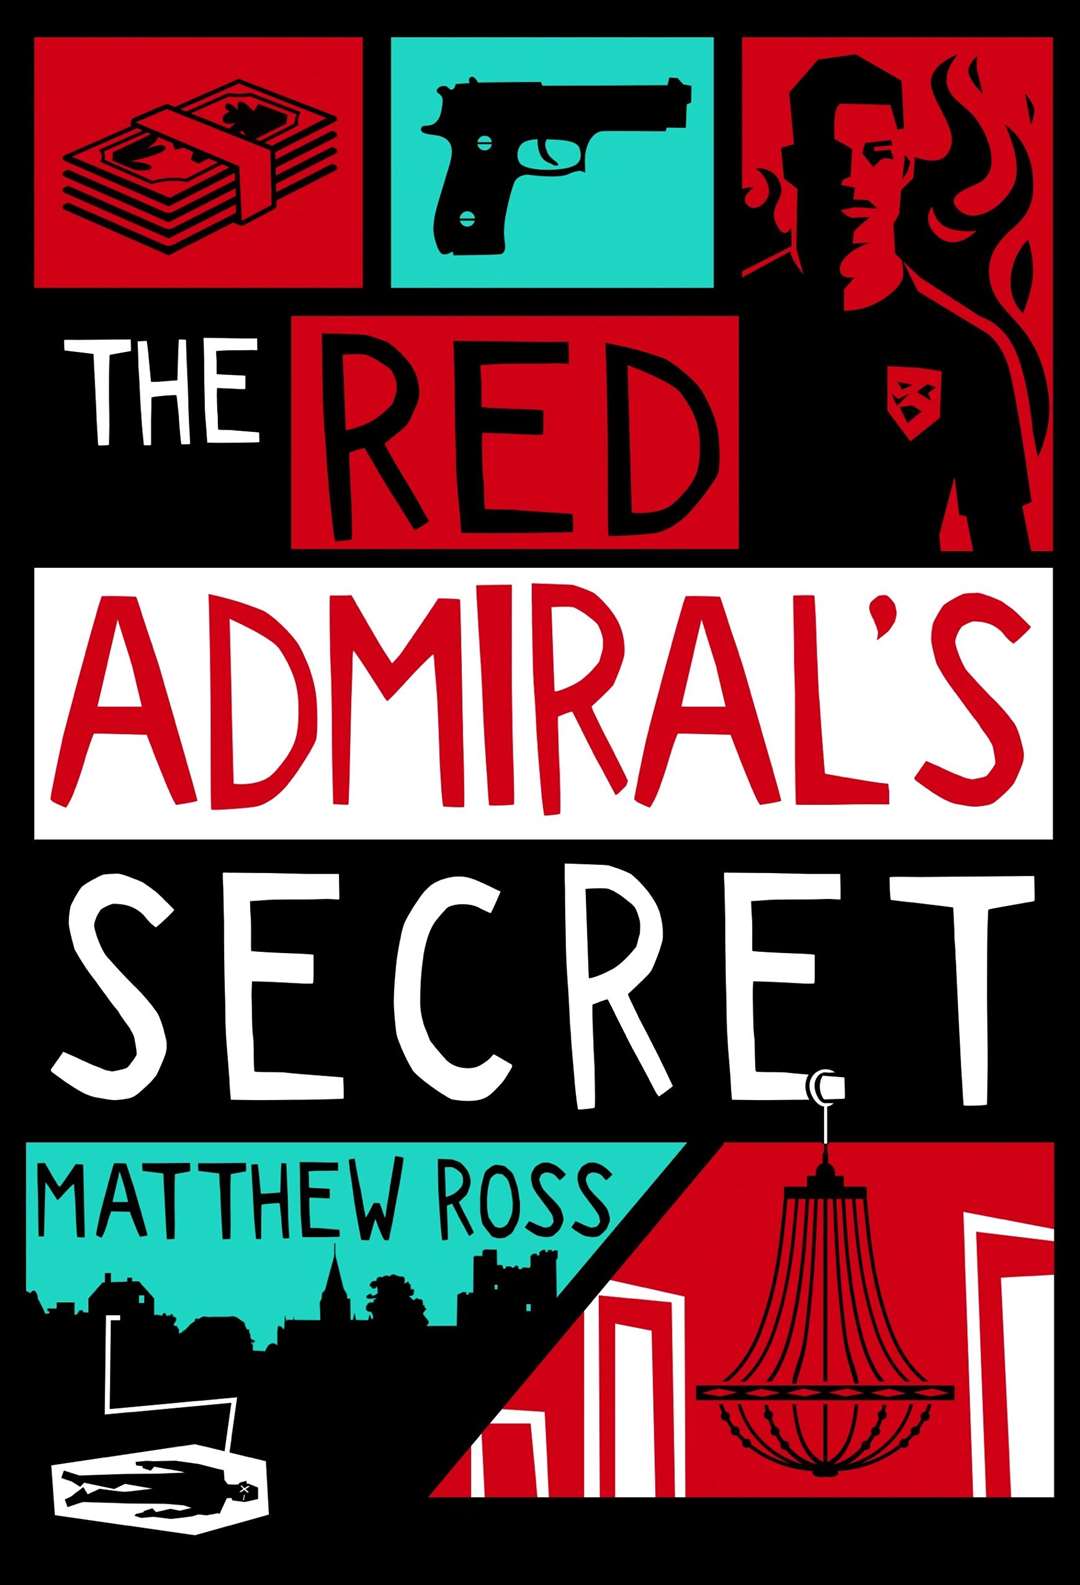 Matthew Ross from Medway's second book, The Red Admiral's Secret Picture: Red Dog Press